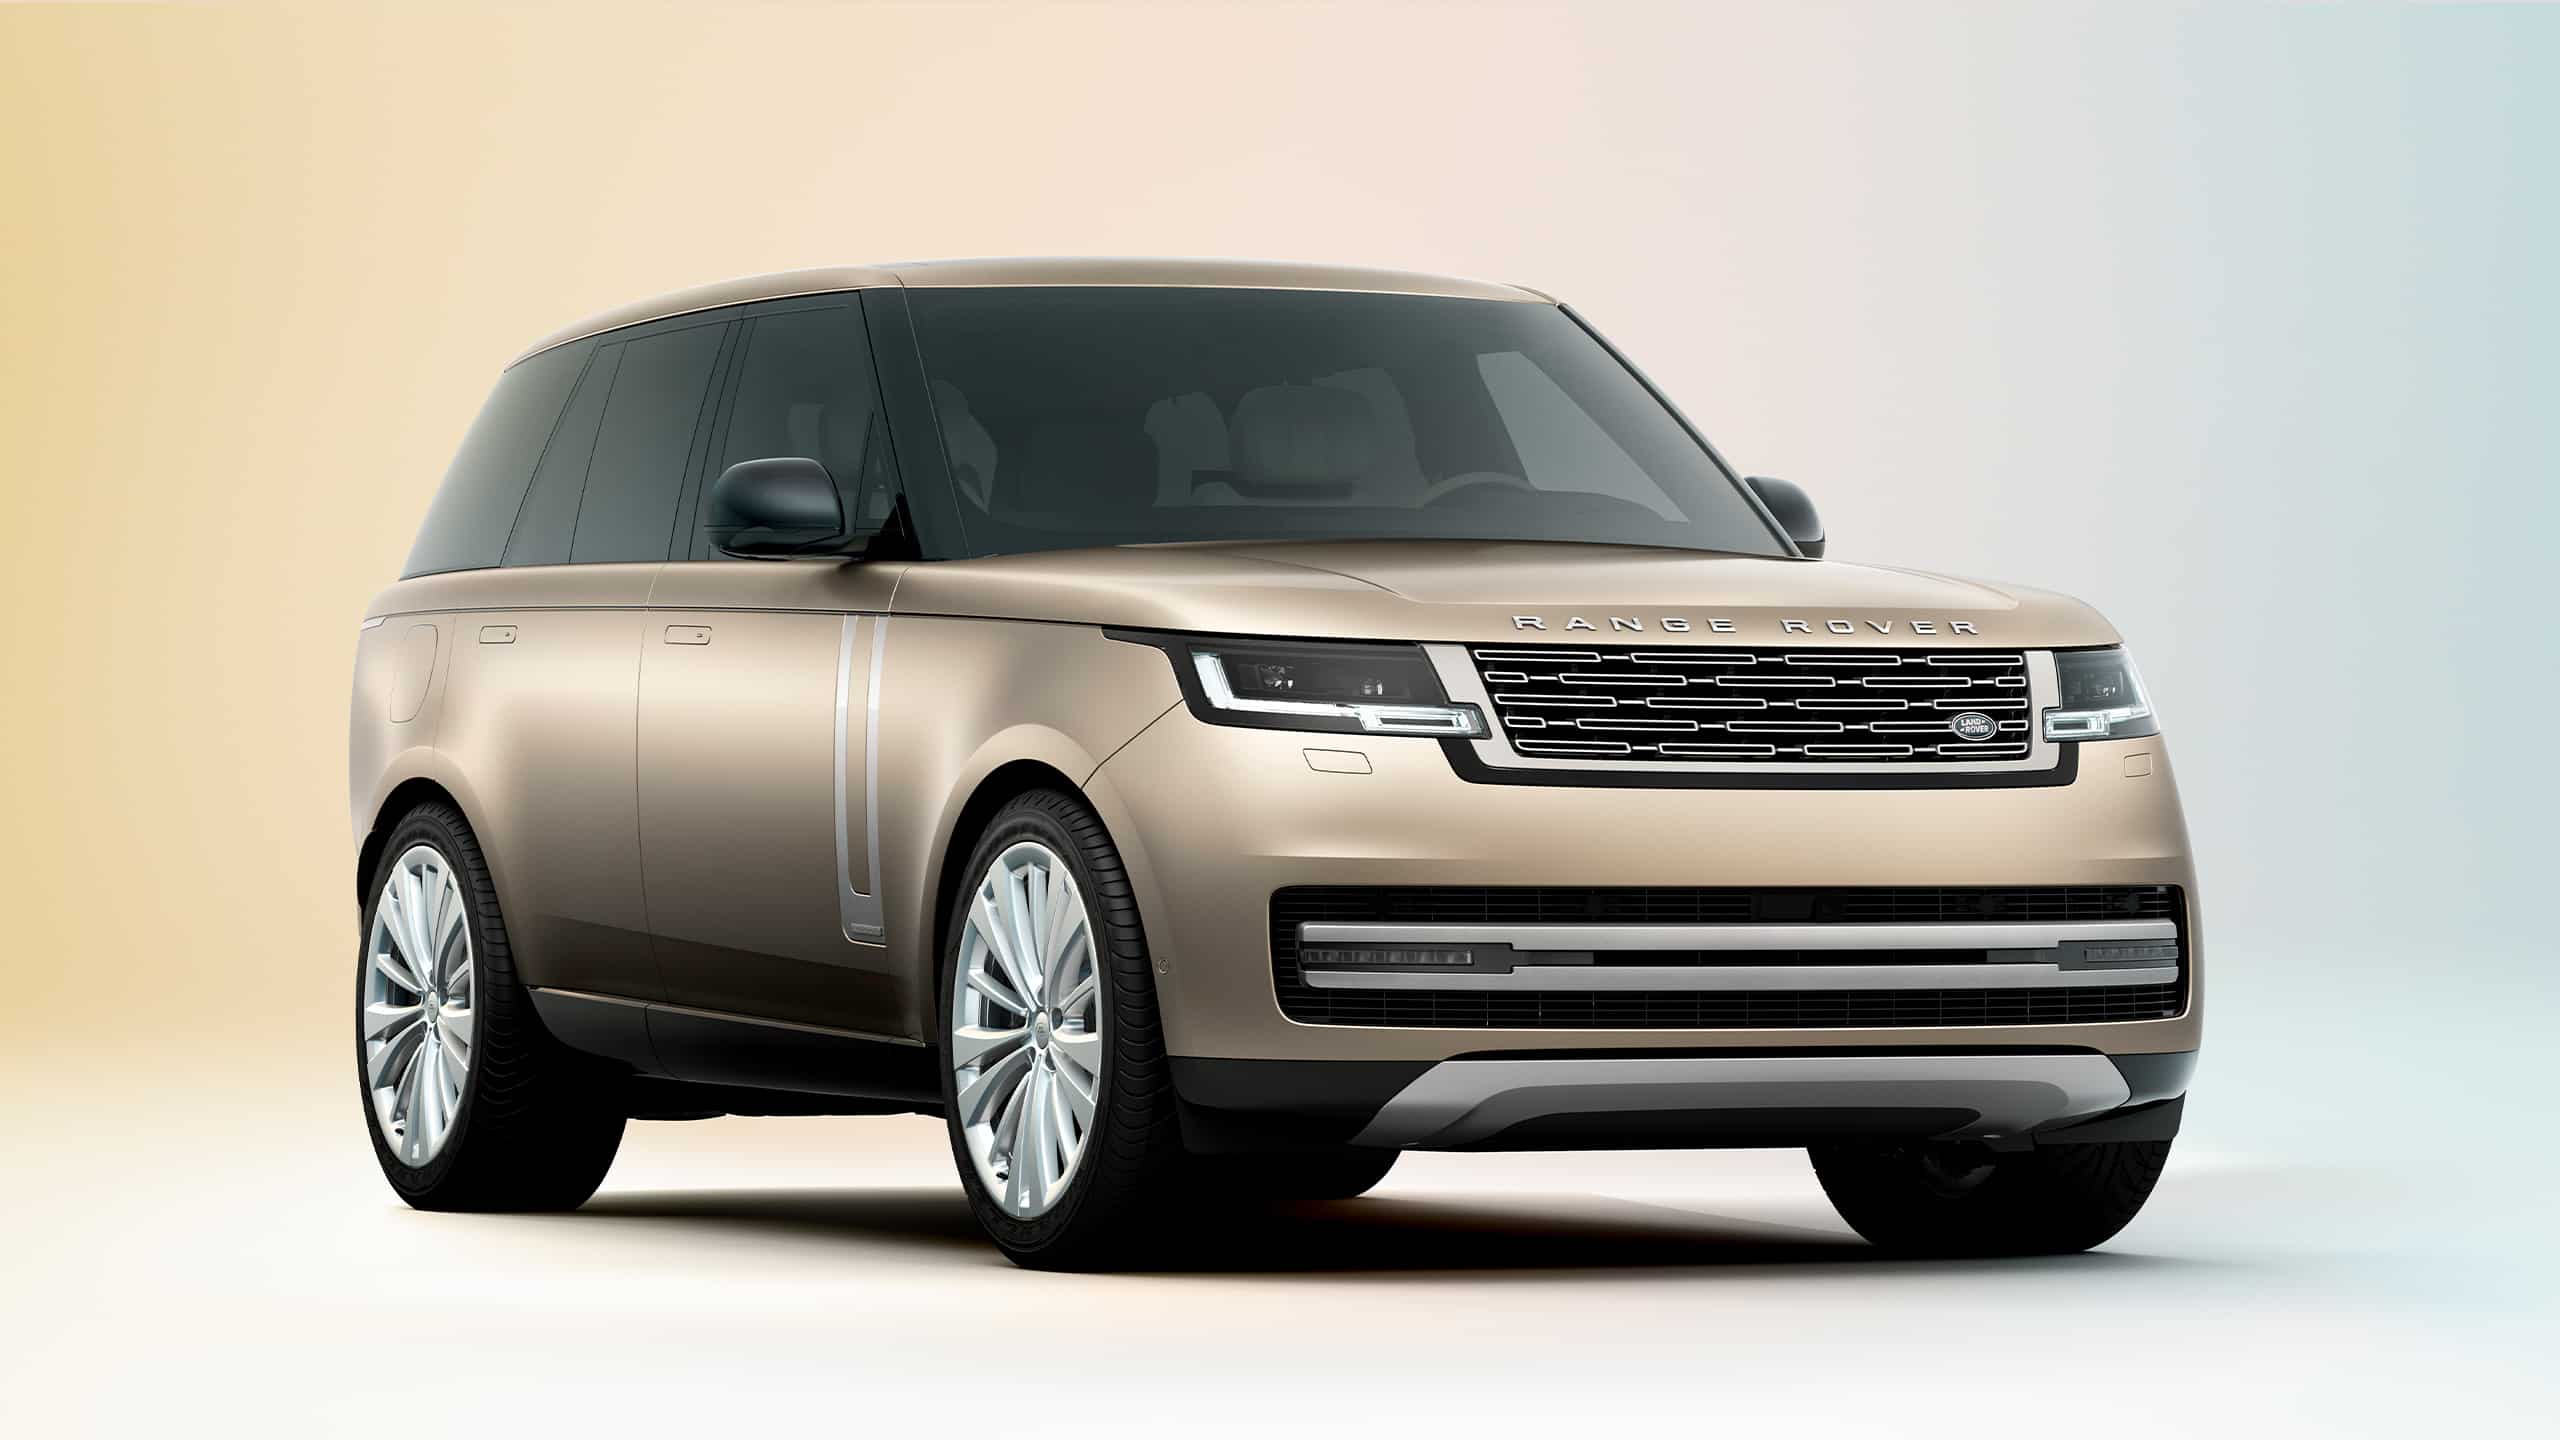 Front right profile representation of New Range Rover on gradient background